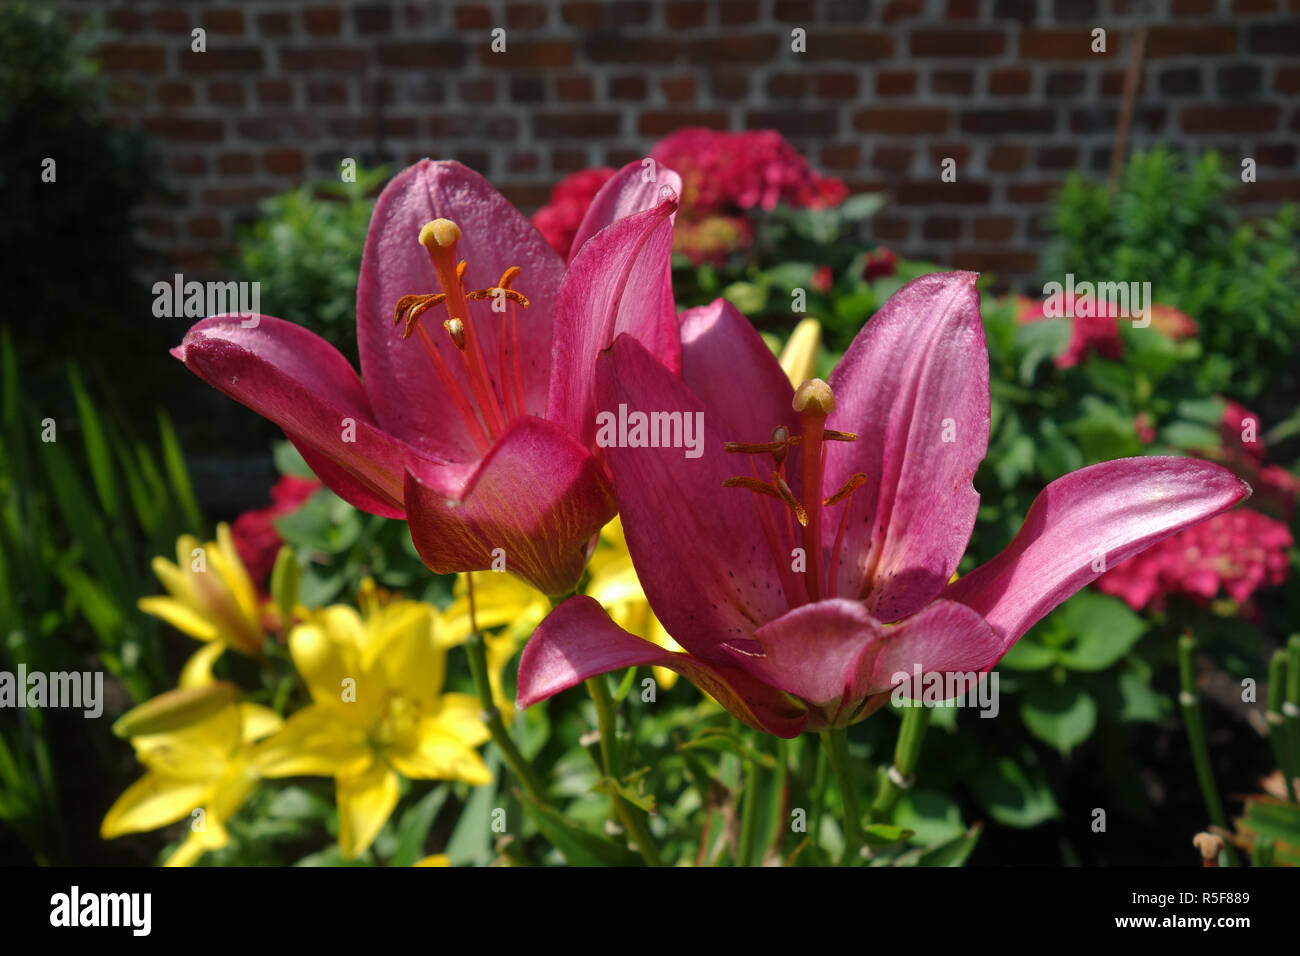 red and yellow lily flowers Stock Photo